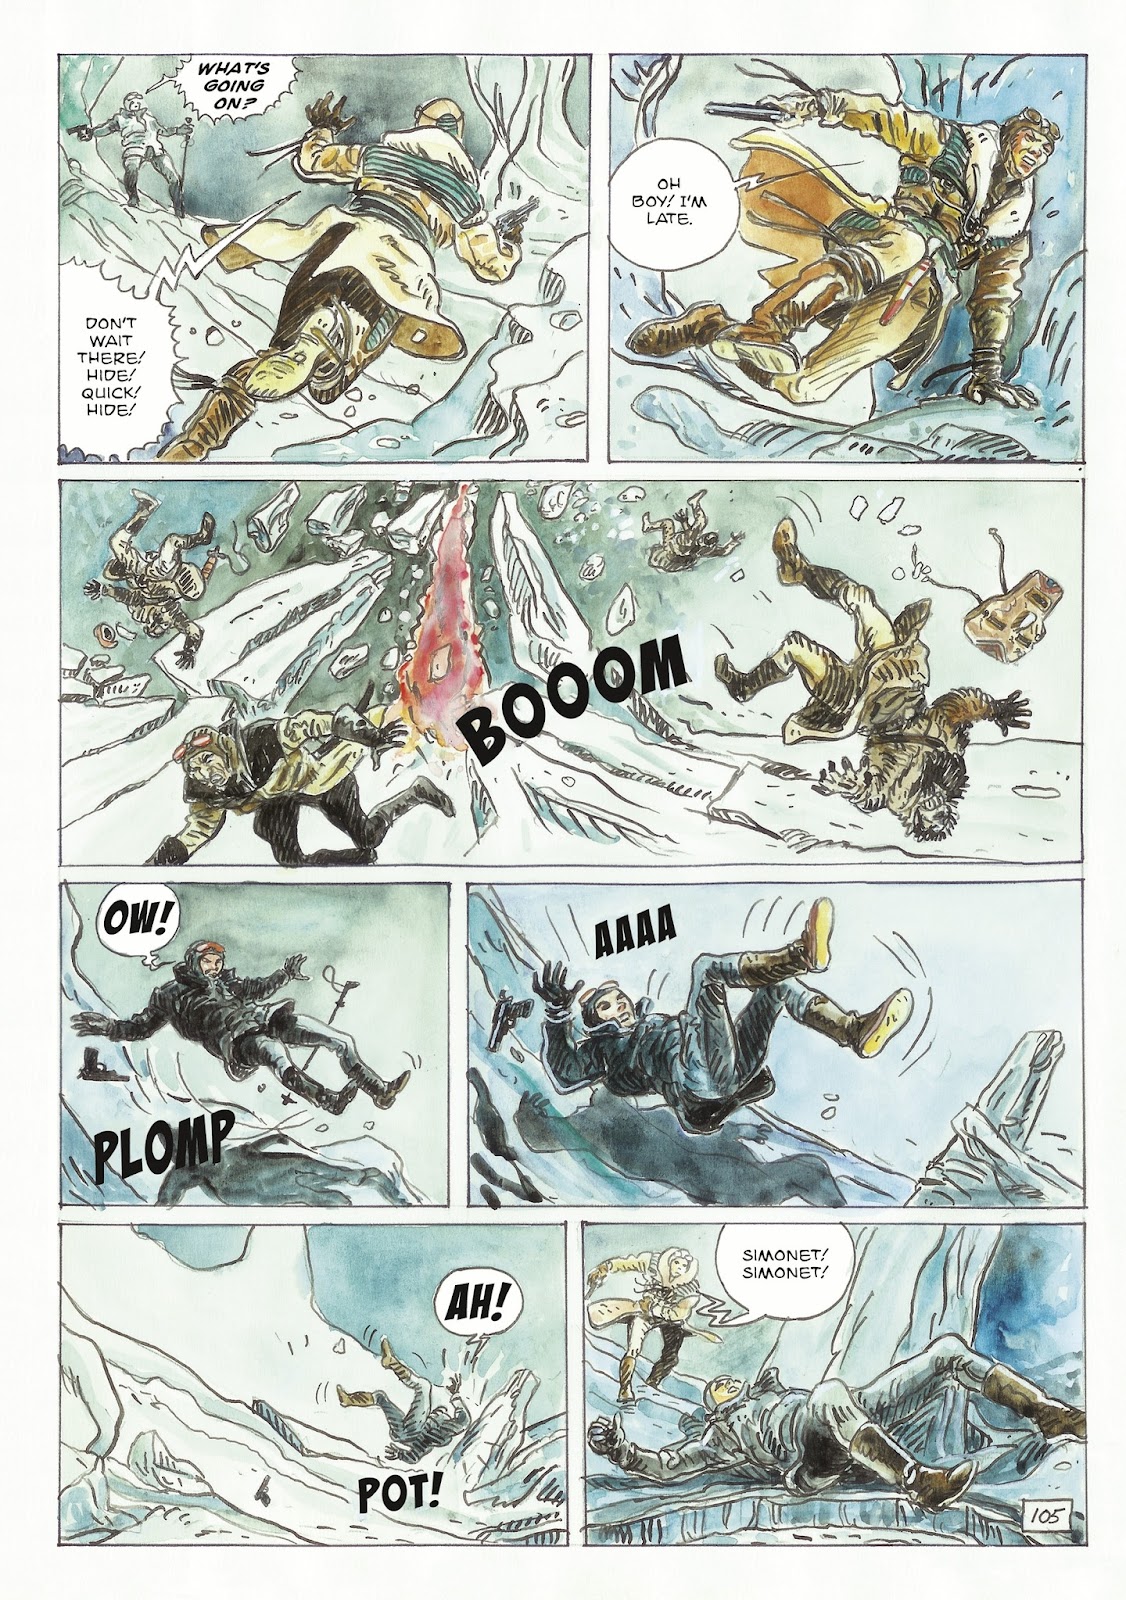 The Man With the Bear issue 2 - Page 51